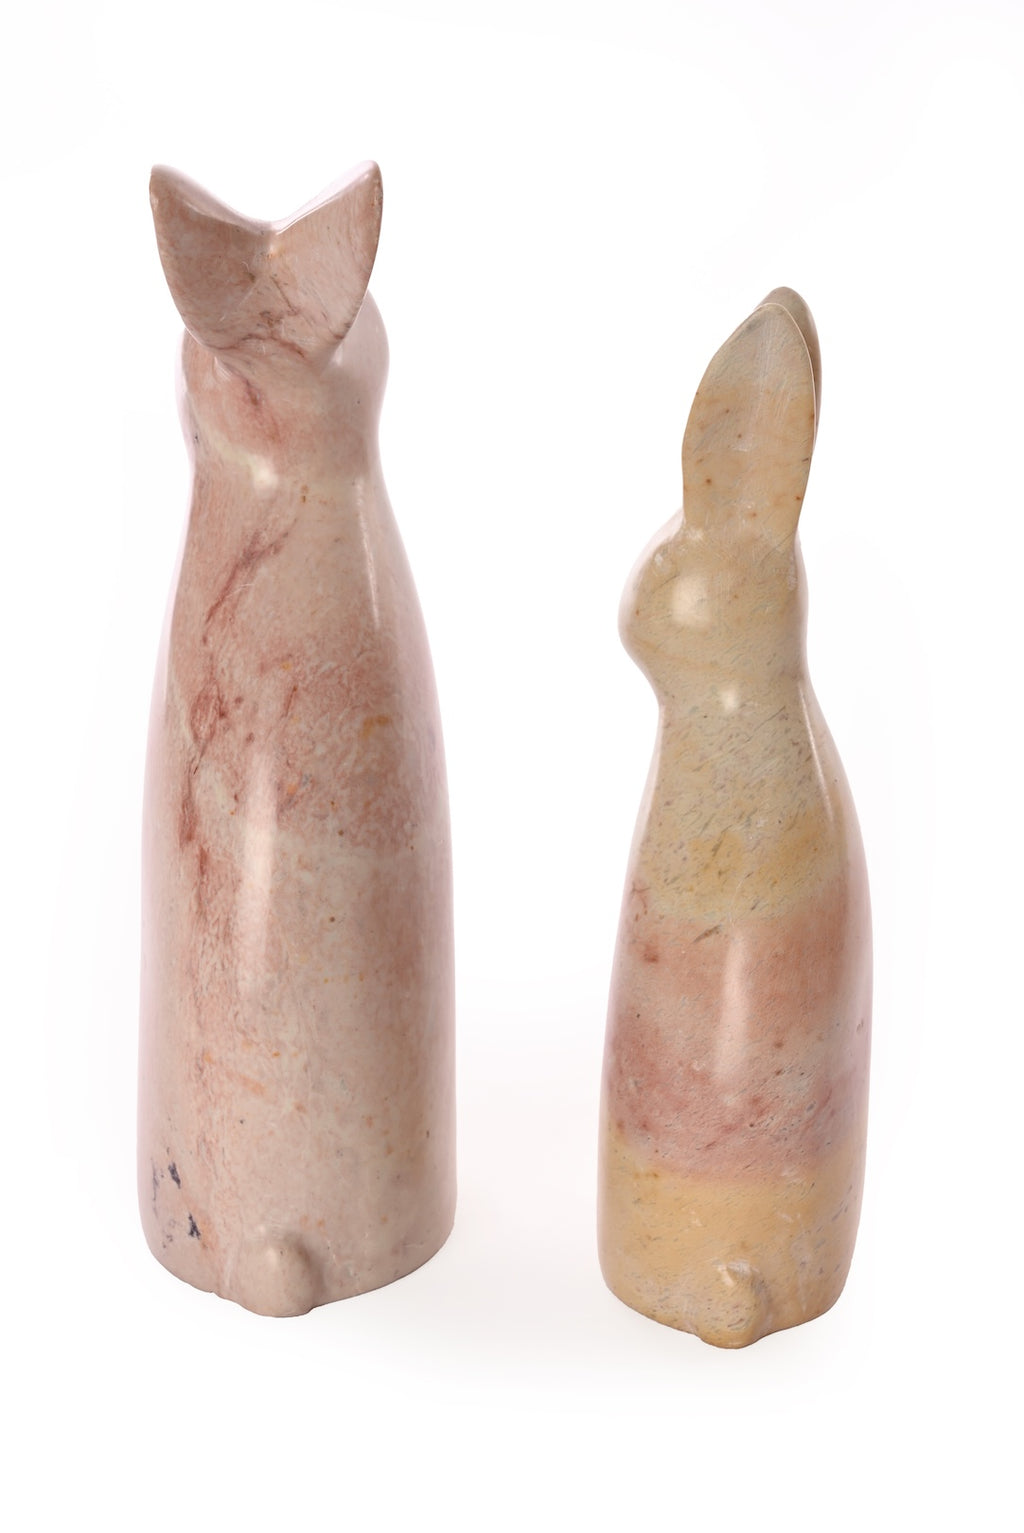 Pink Marbled Soapstone Pair of Bunnies